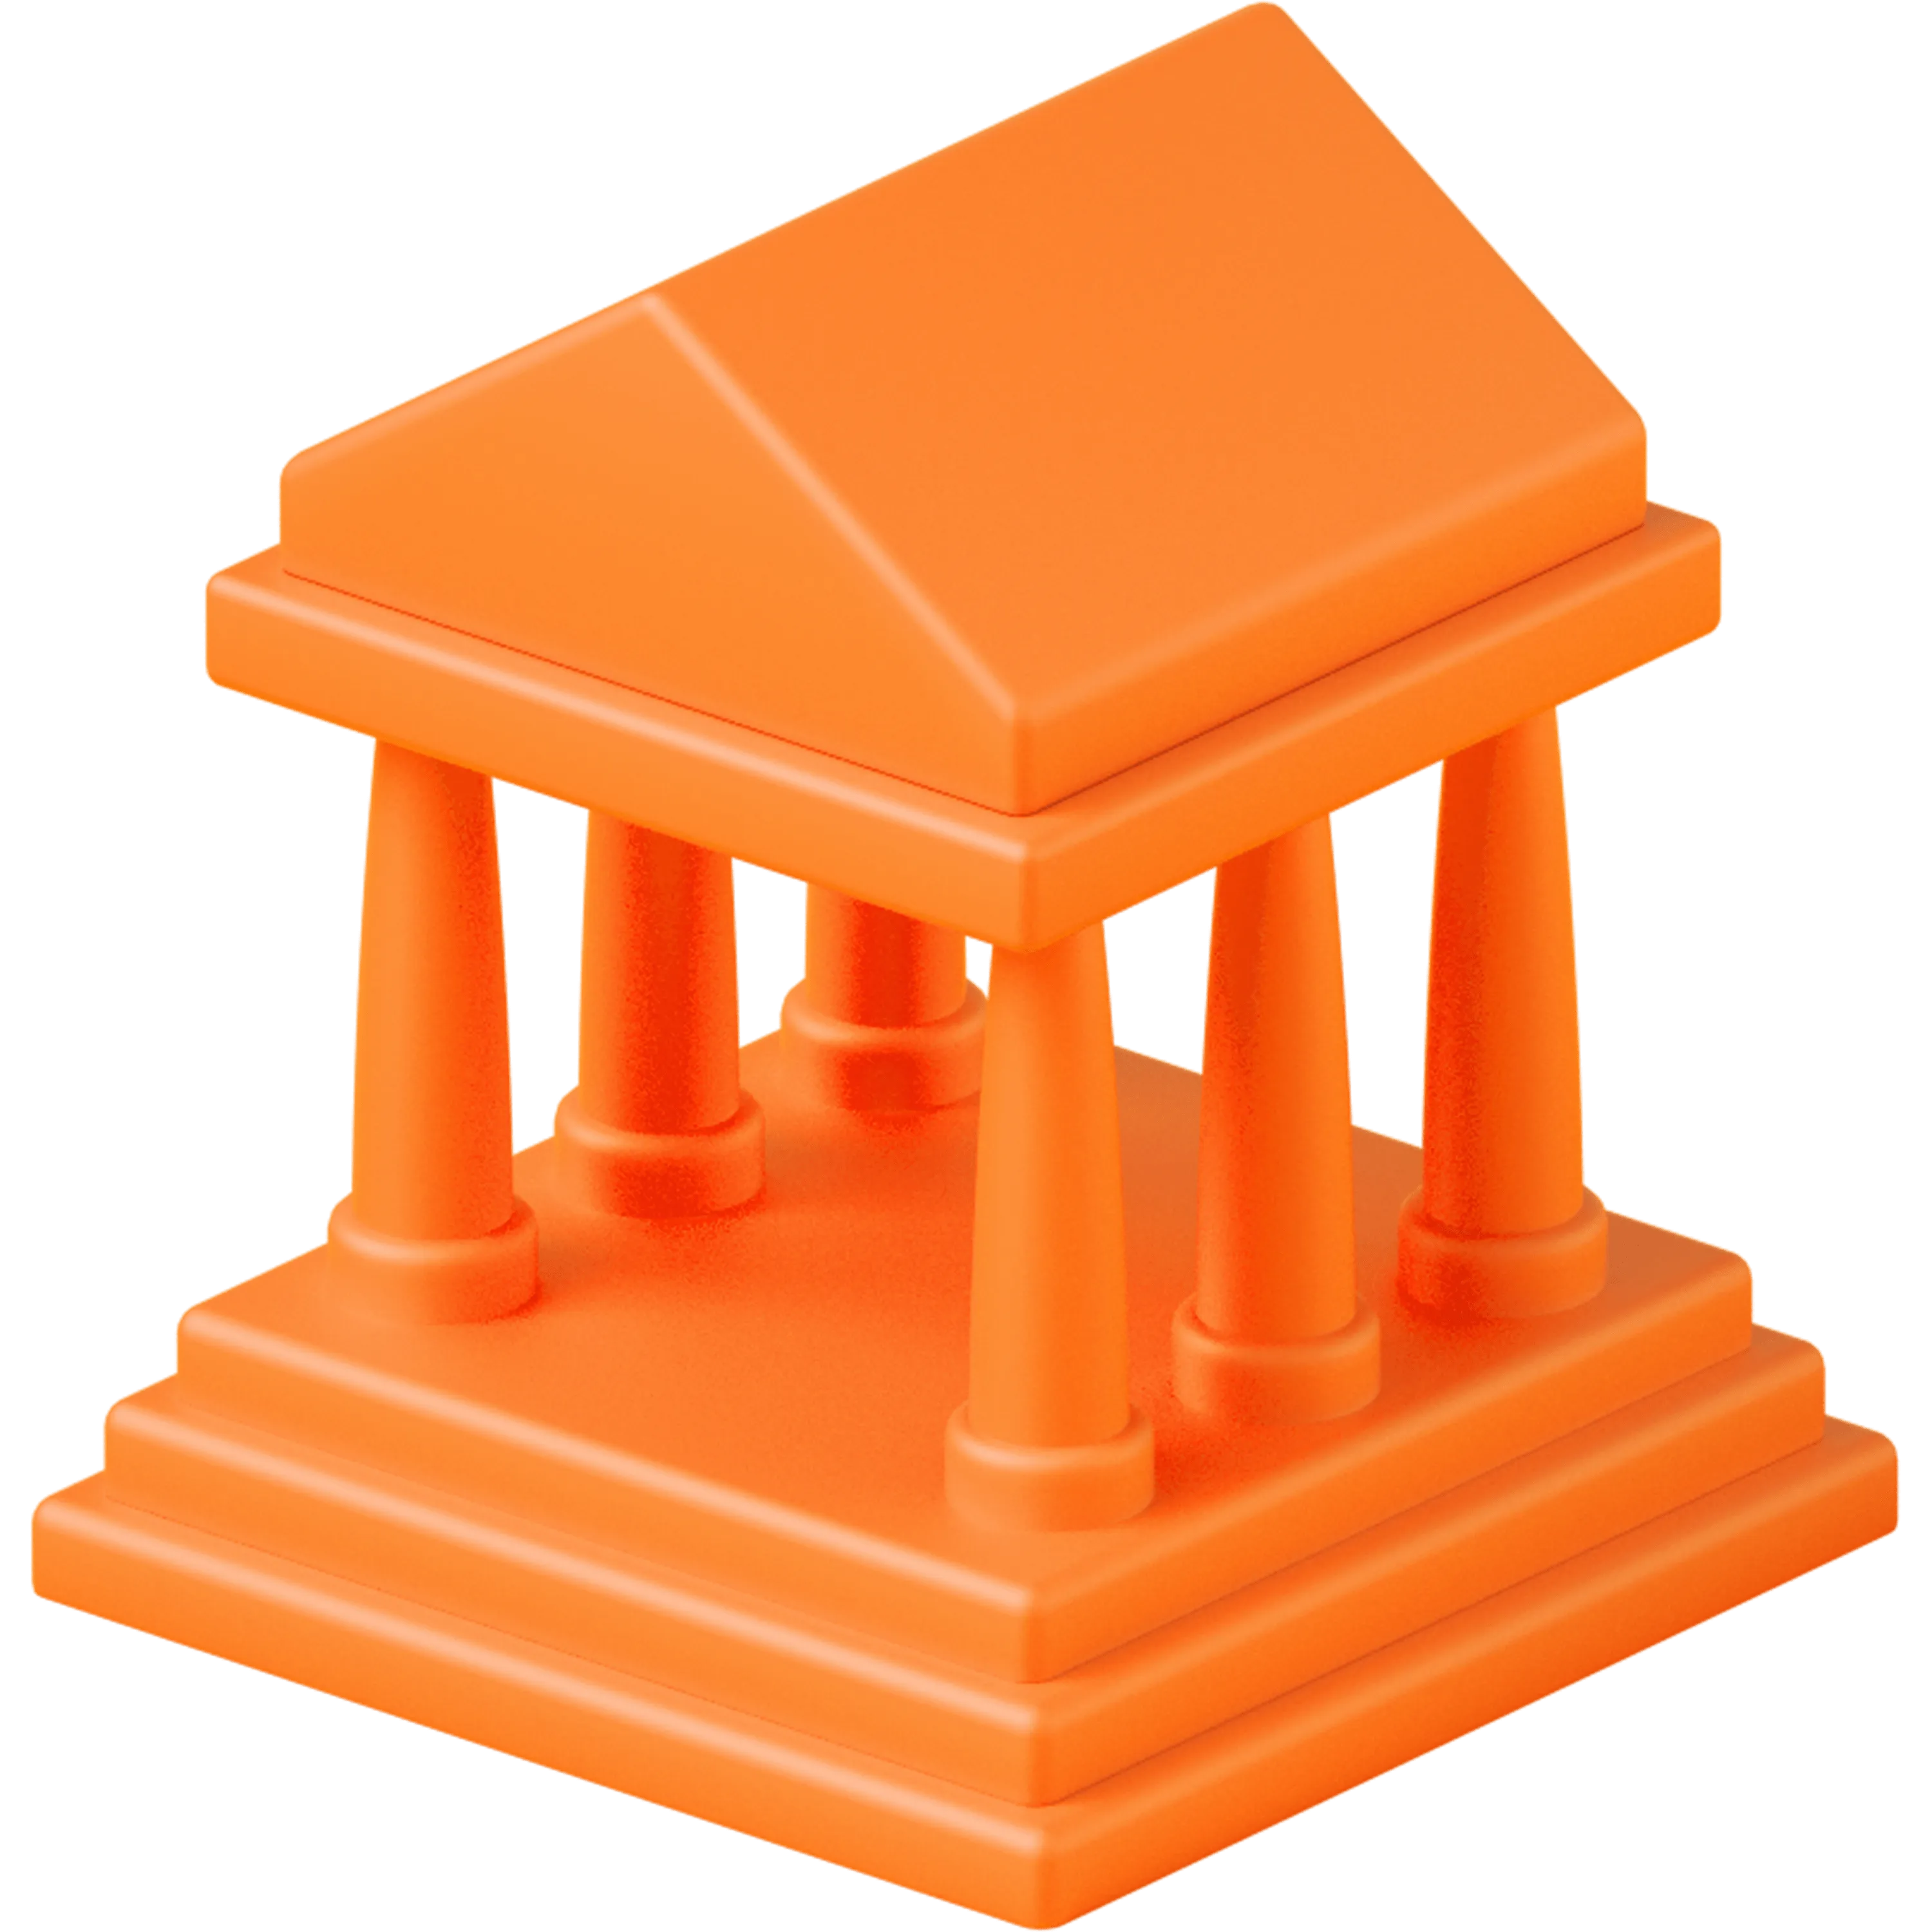 A 3D orange-red building with pillars icon.